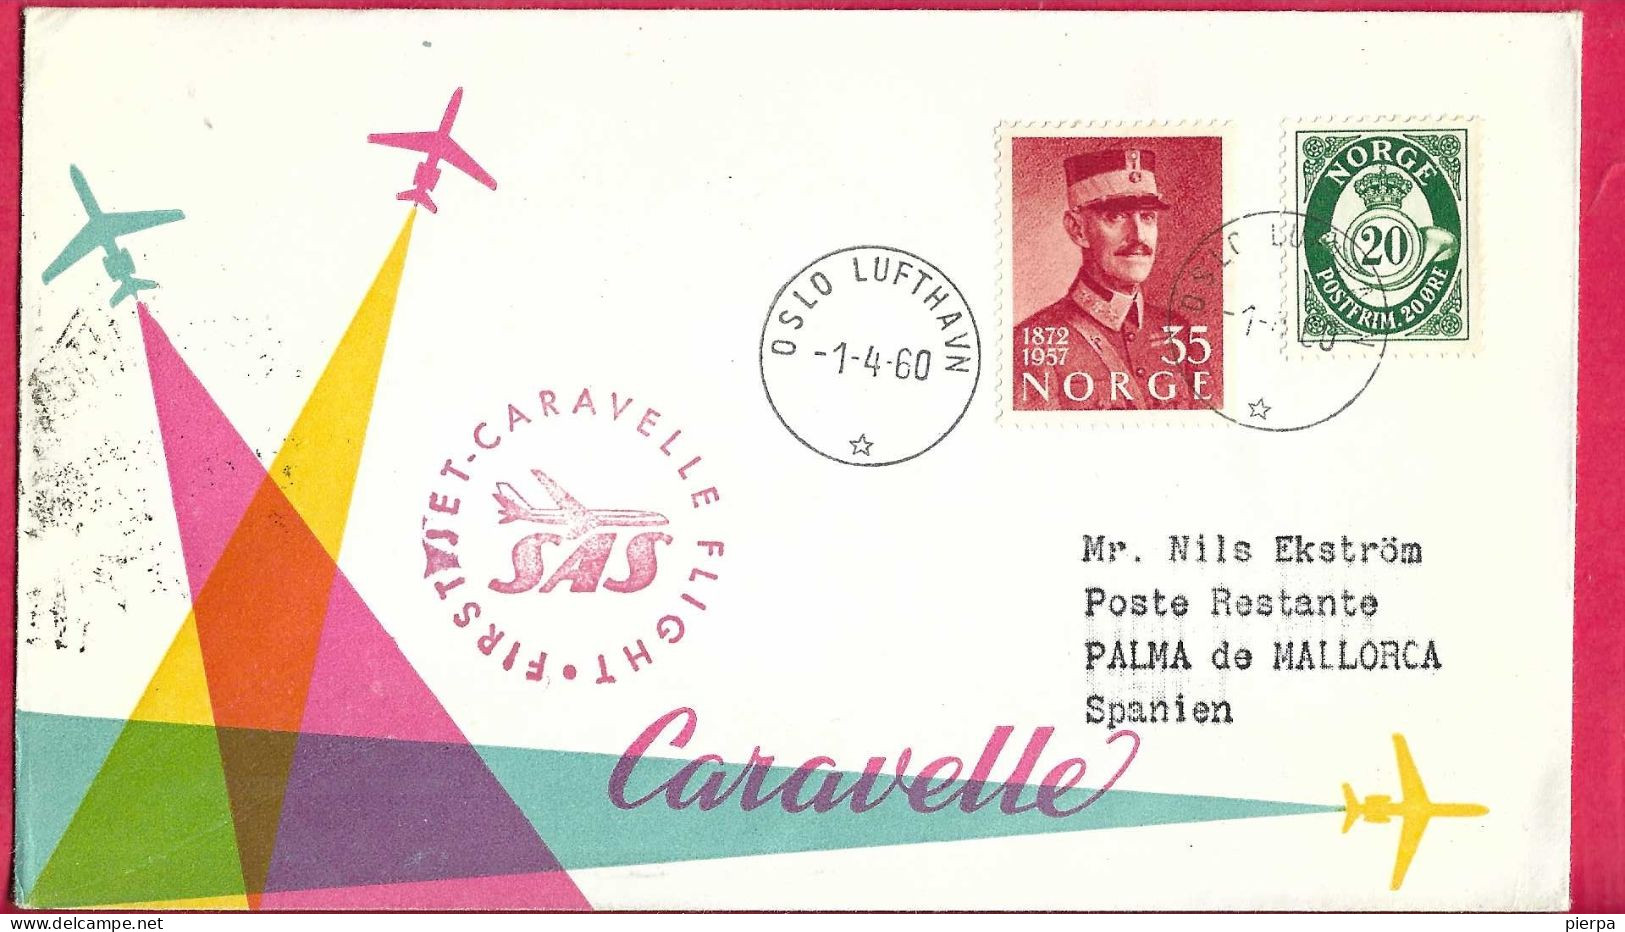 NORGE - FIRST CARAVELLE FLIGHT - SAS - FROM OSLO TO PALMA DE MALLORCA *1.4.60* ON OFFICIAL COVER - Storia Postale